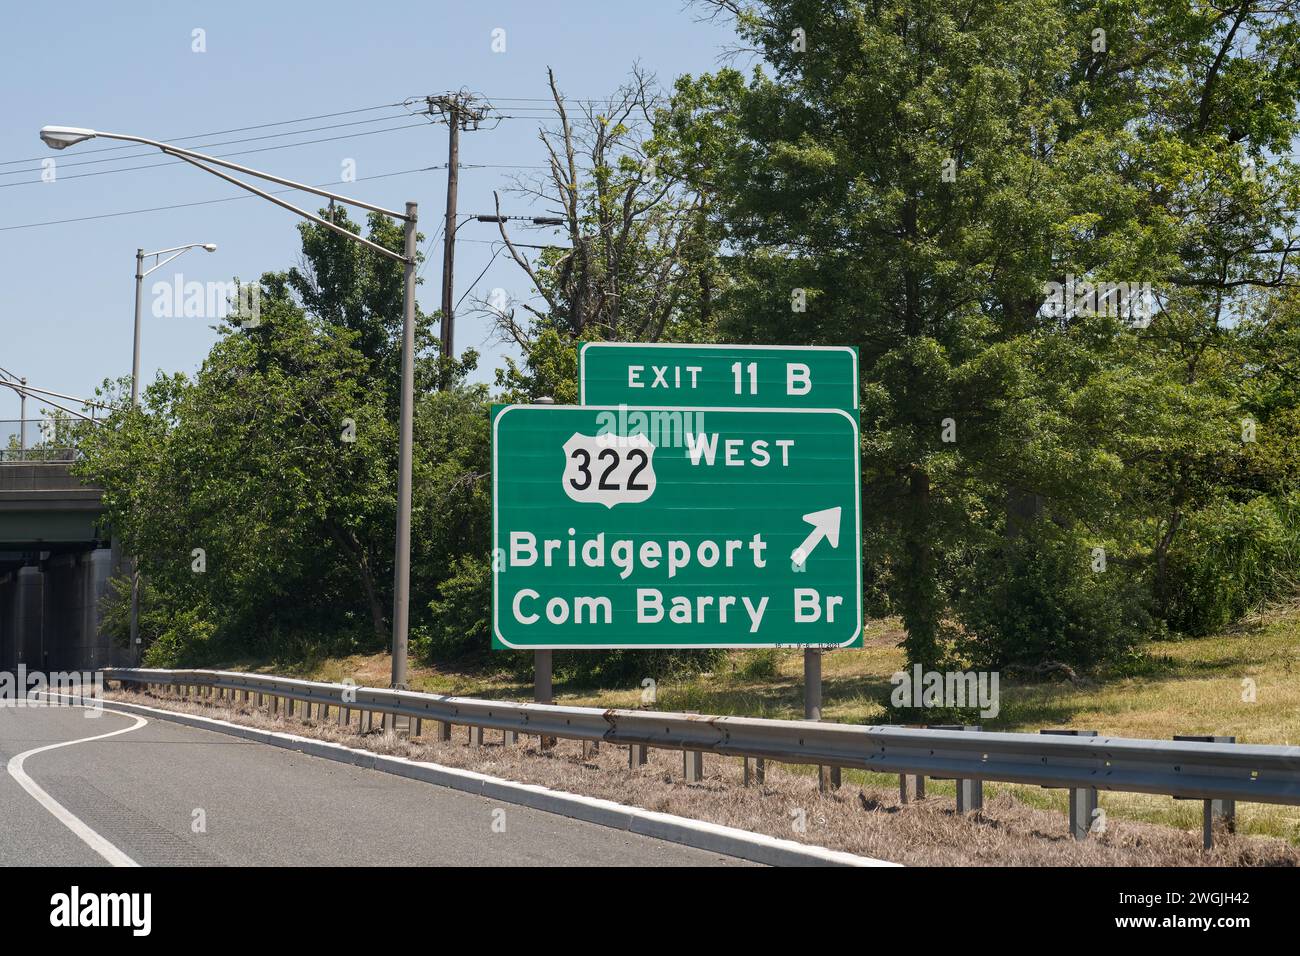 Exit 11 B sign on I-295for US 322 West toward Bridgeport, New Jersey and the Commodore Barry Bridge Stock Photo